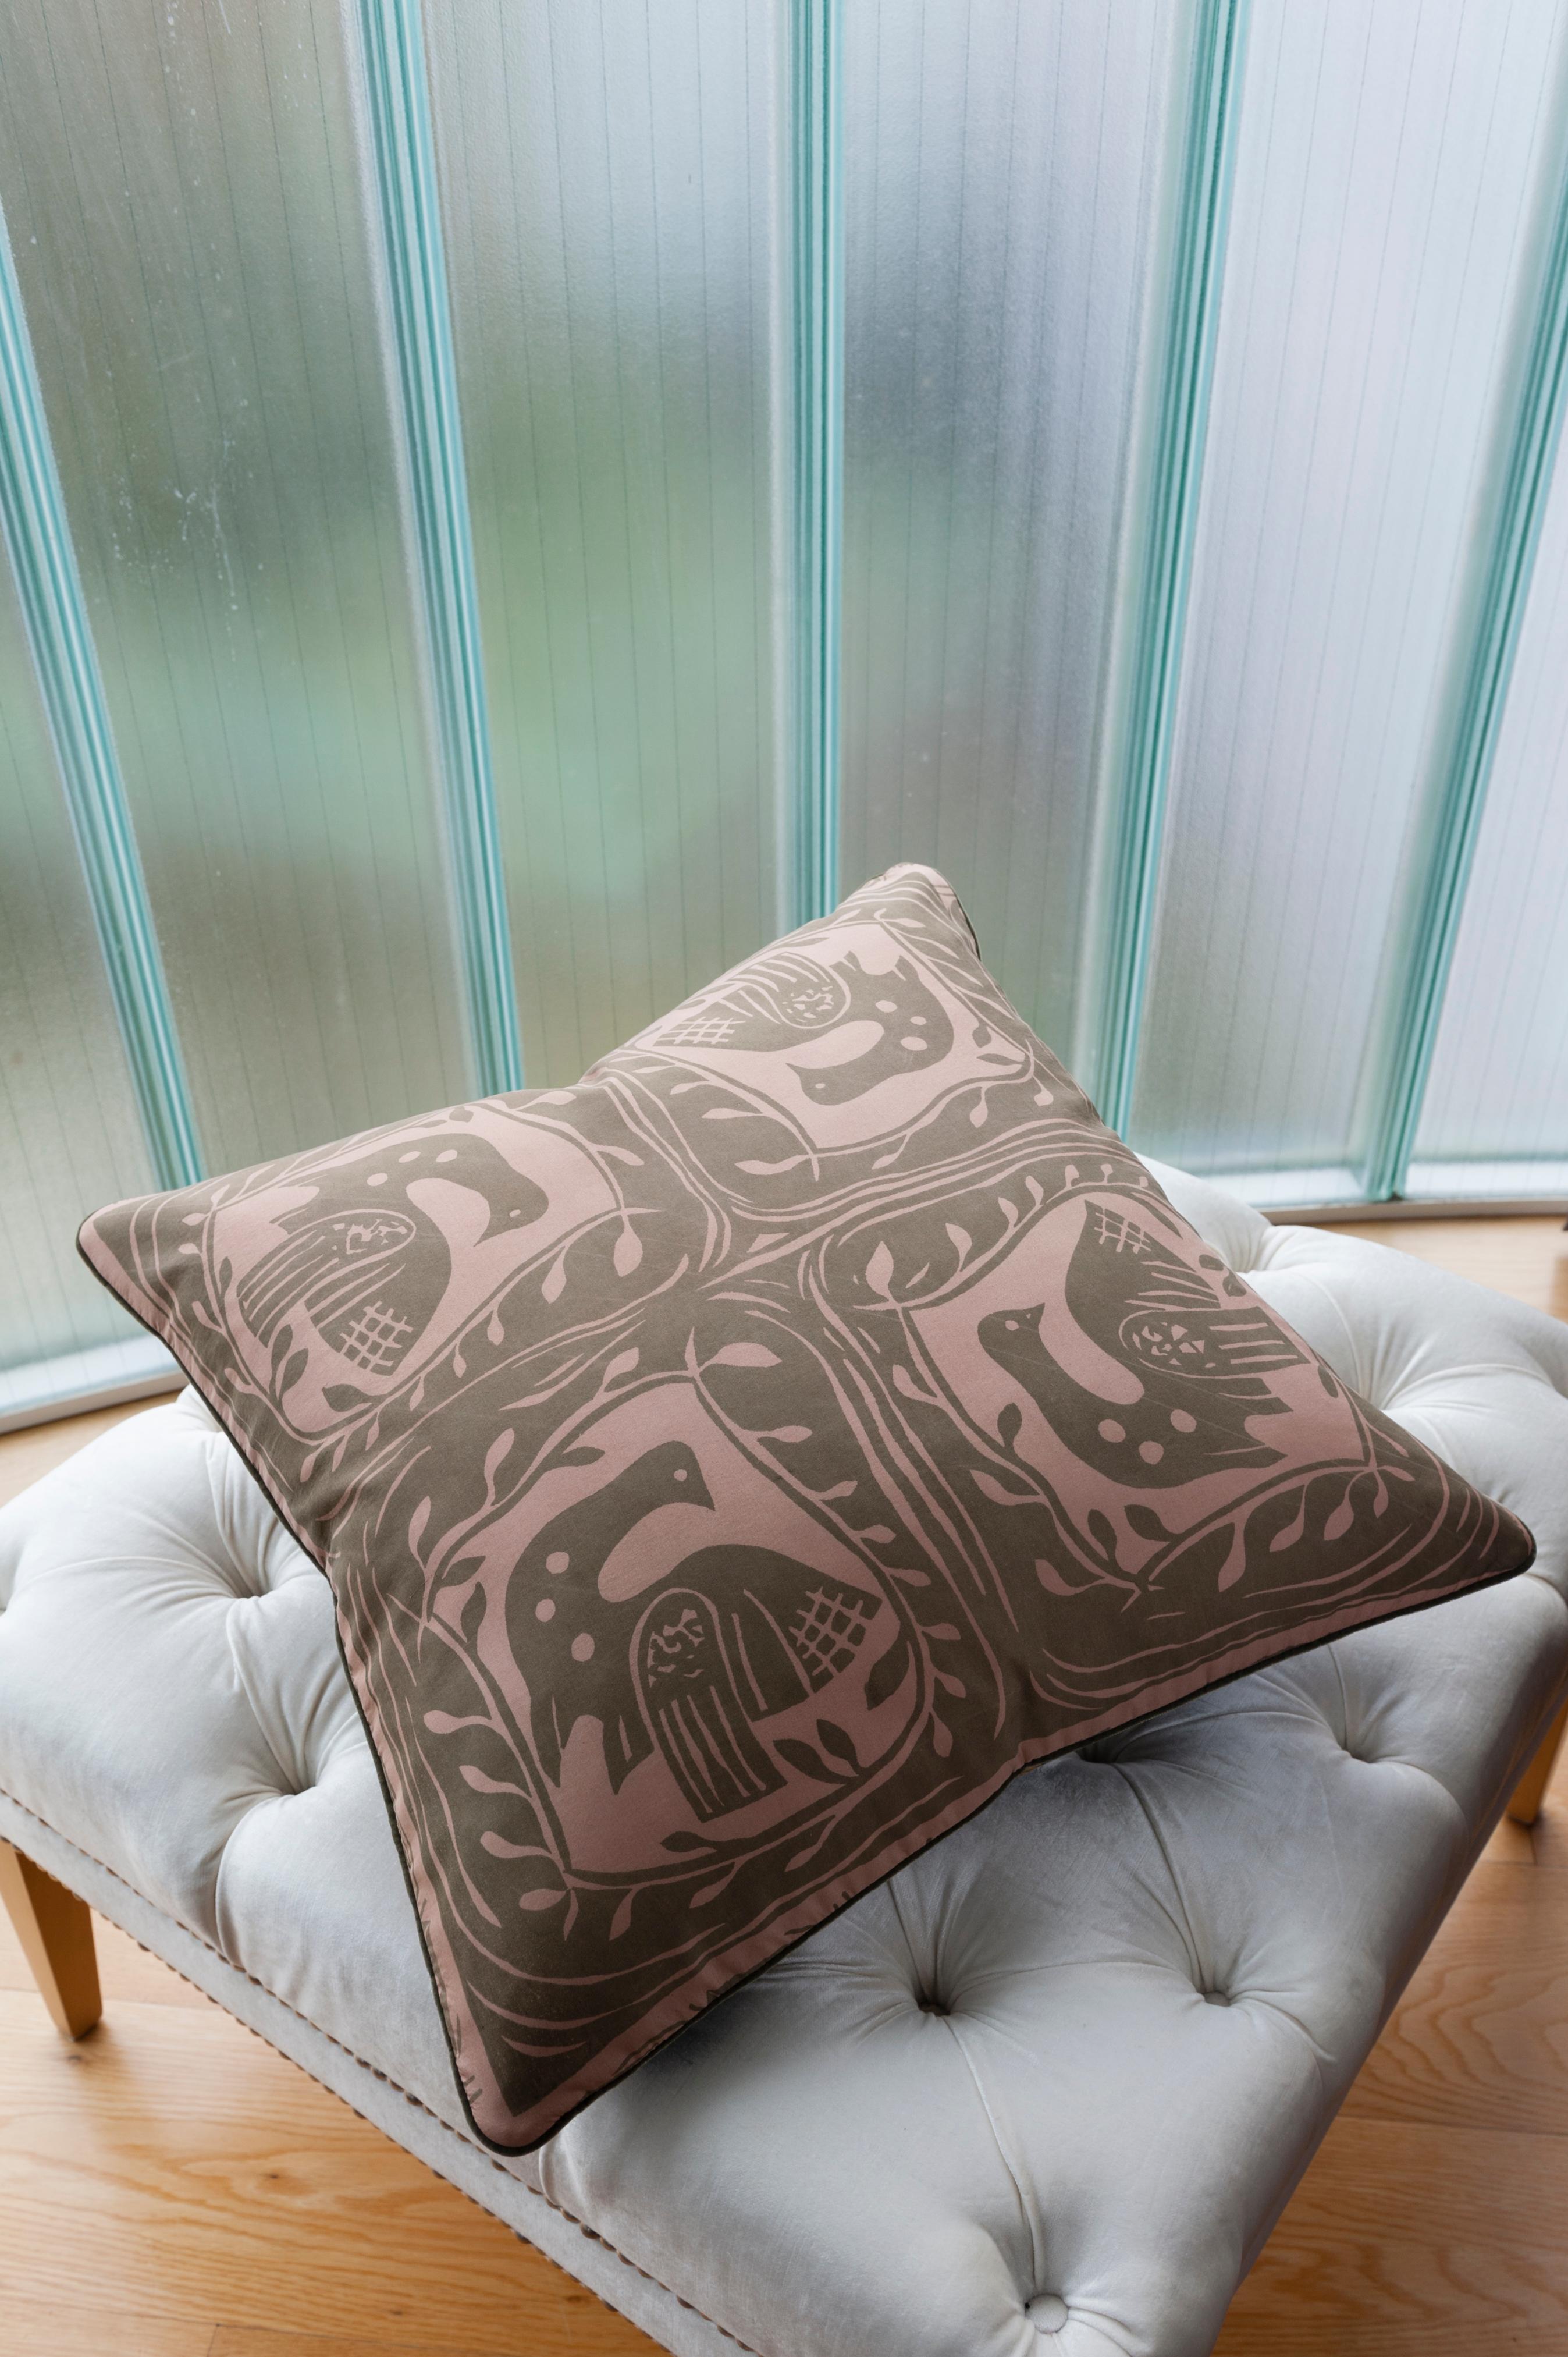 Mid-20th Century Vintage Cushions, Luxury Silk Bespoke Pillow ‘Dove of Peace', Made in London